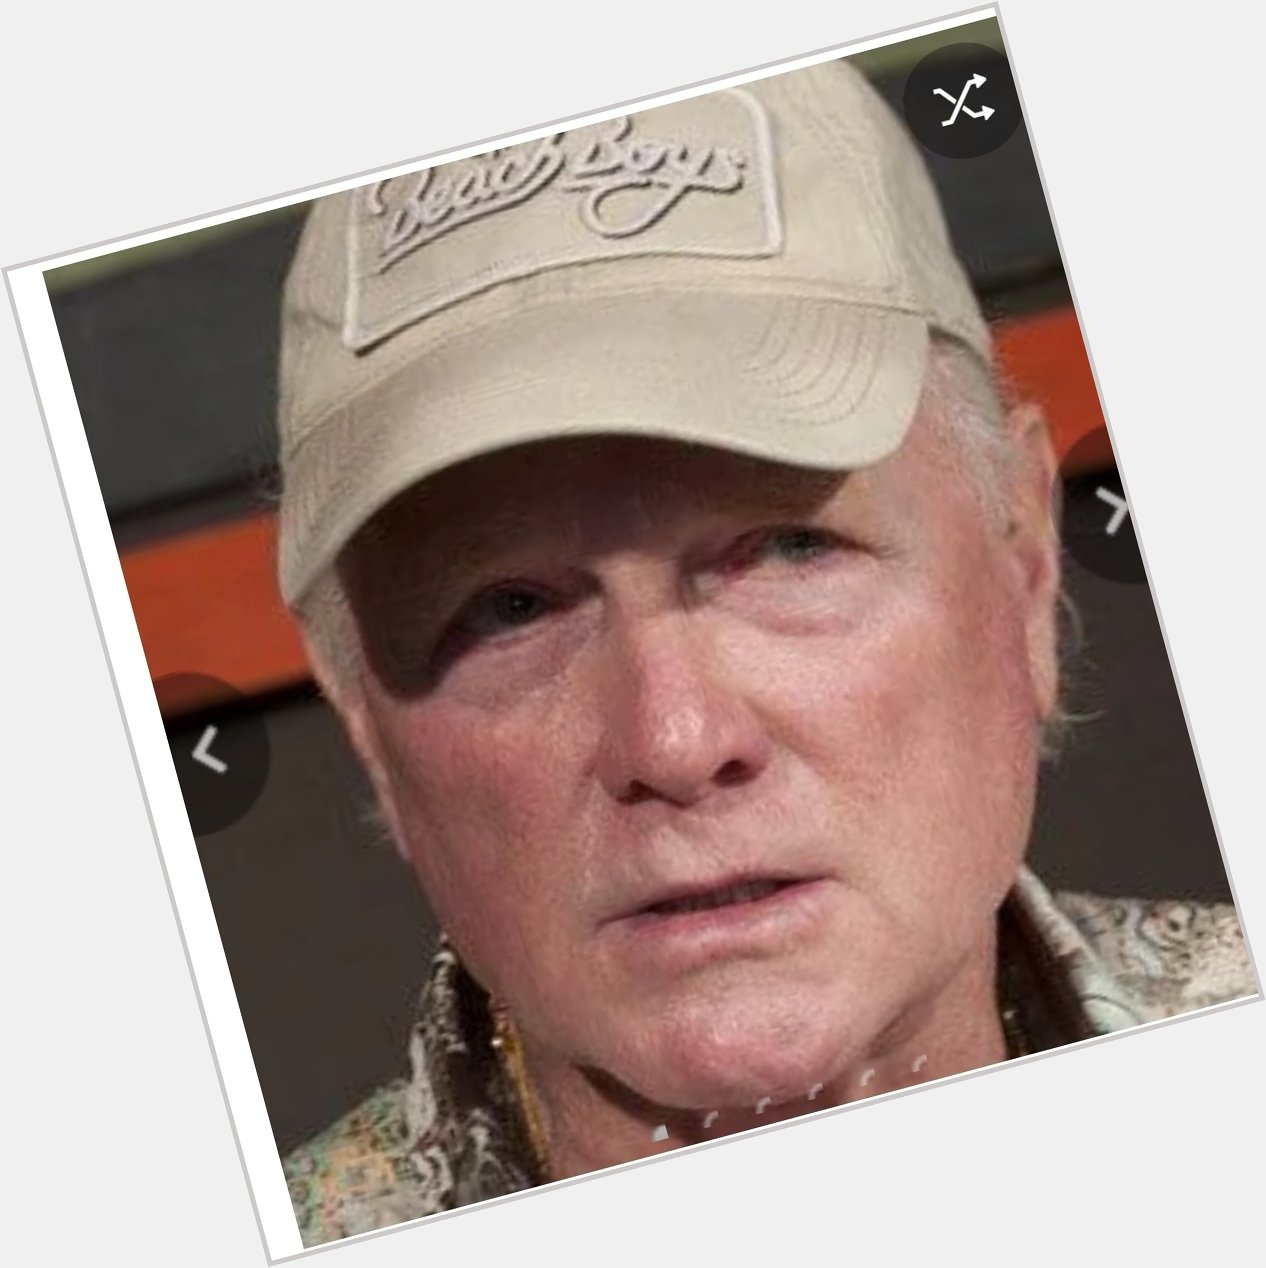 Happy birthday to this great singer. Happy birthday to Mike Love 